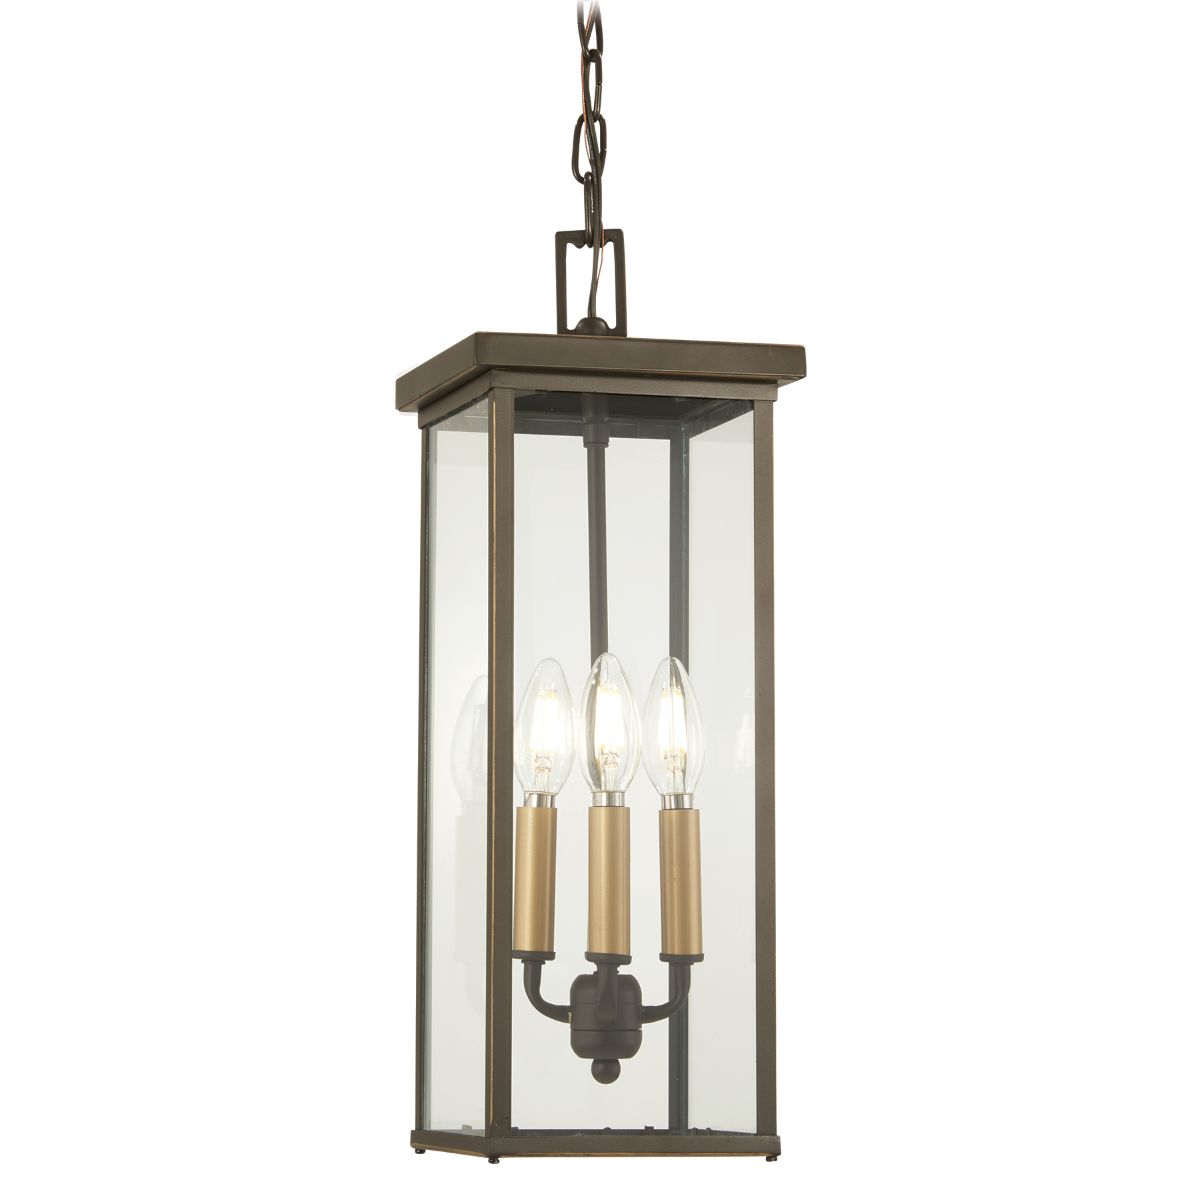 Casway 4 lights 7 in. Outdoor Hanging Lantern Oil Rubbed Bronze & Gold finish